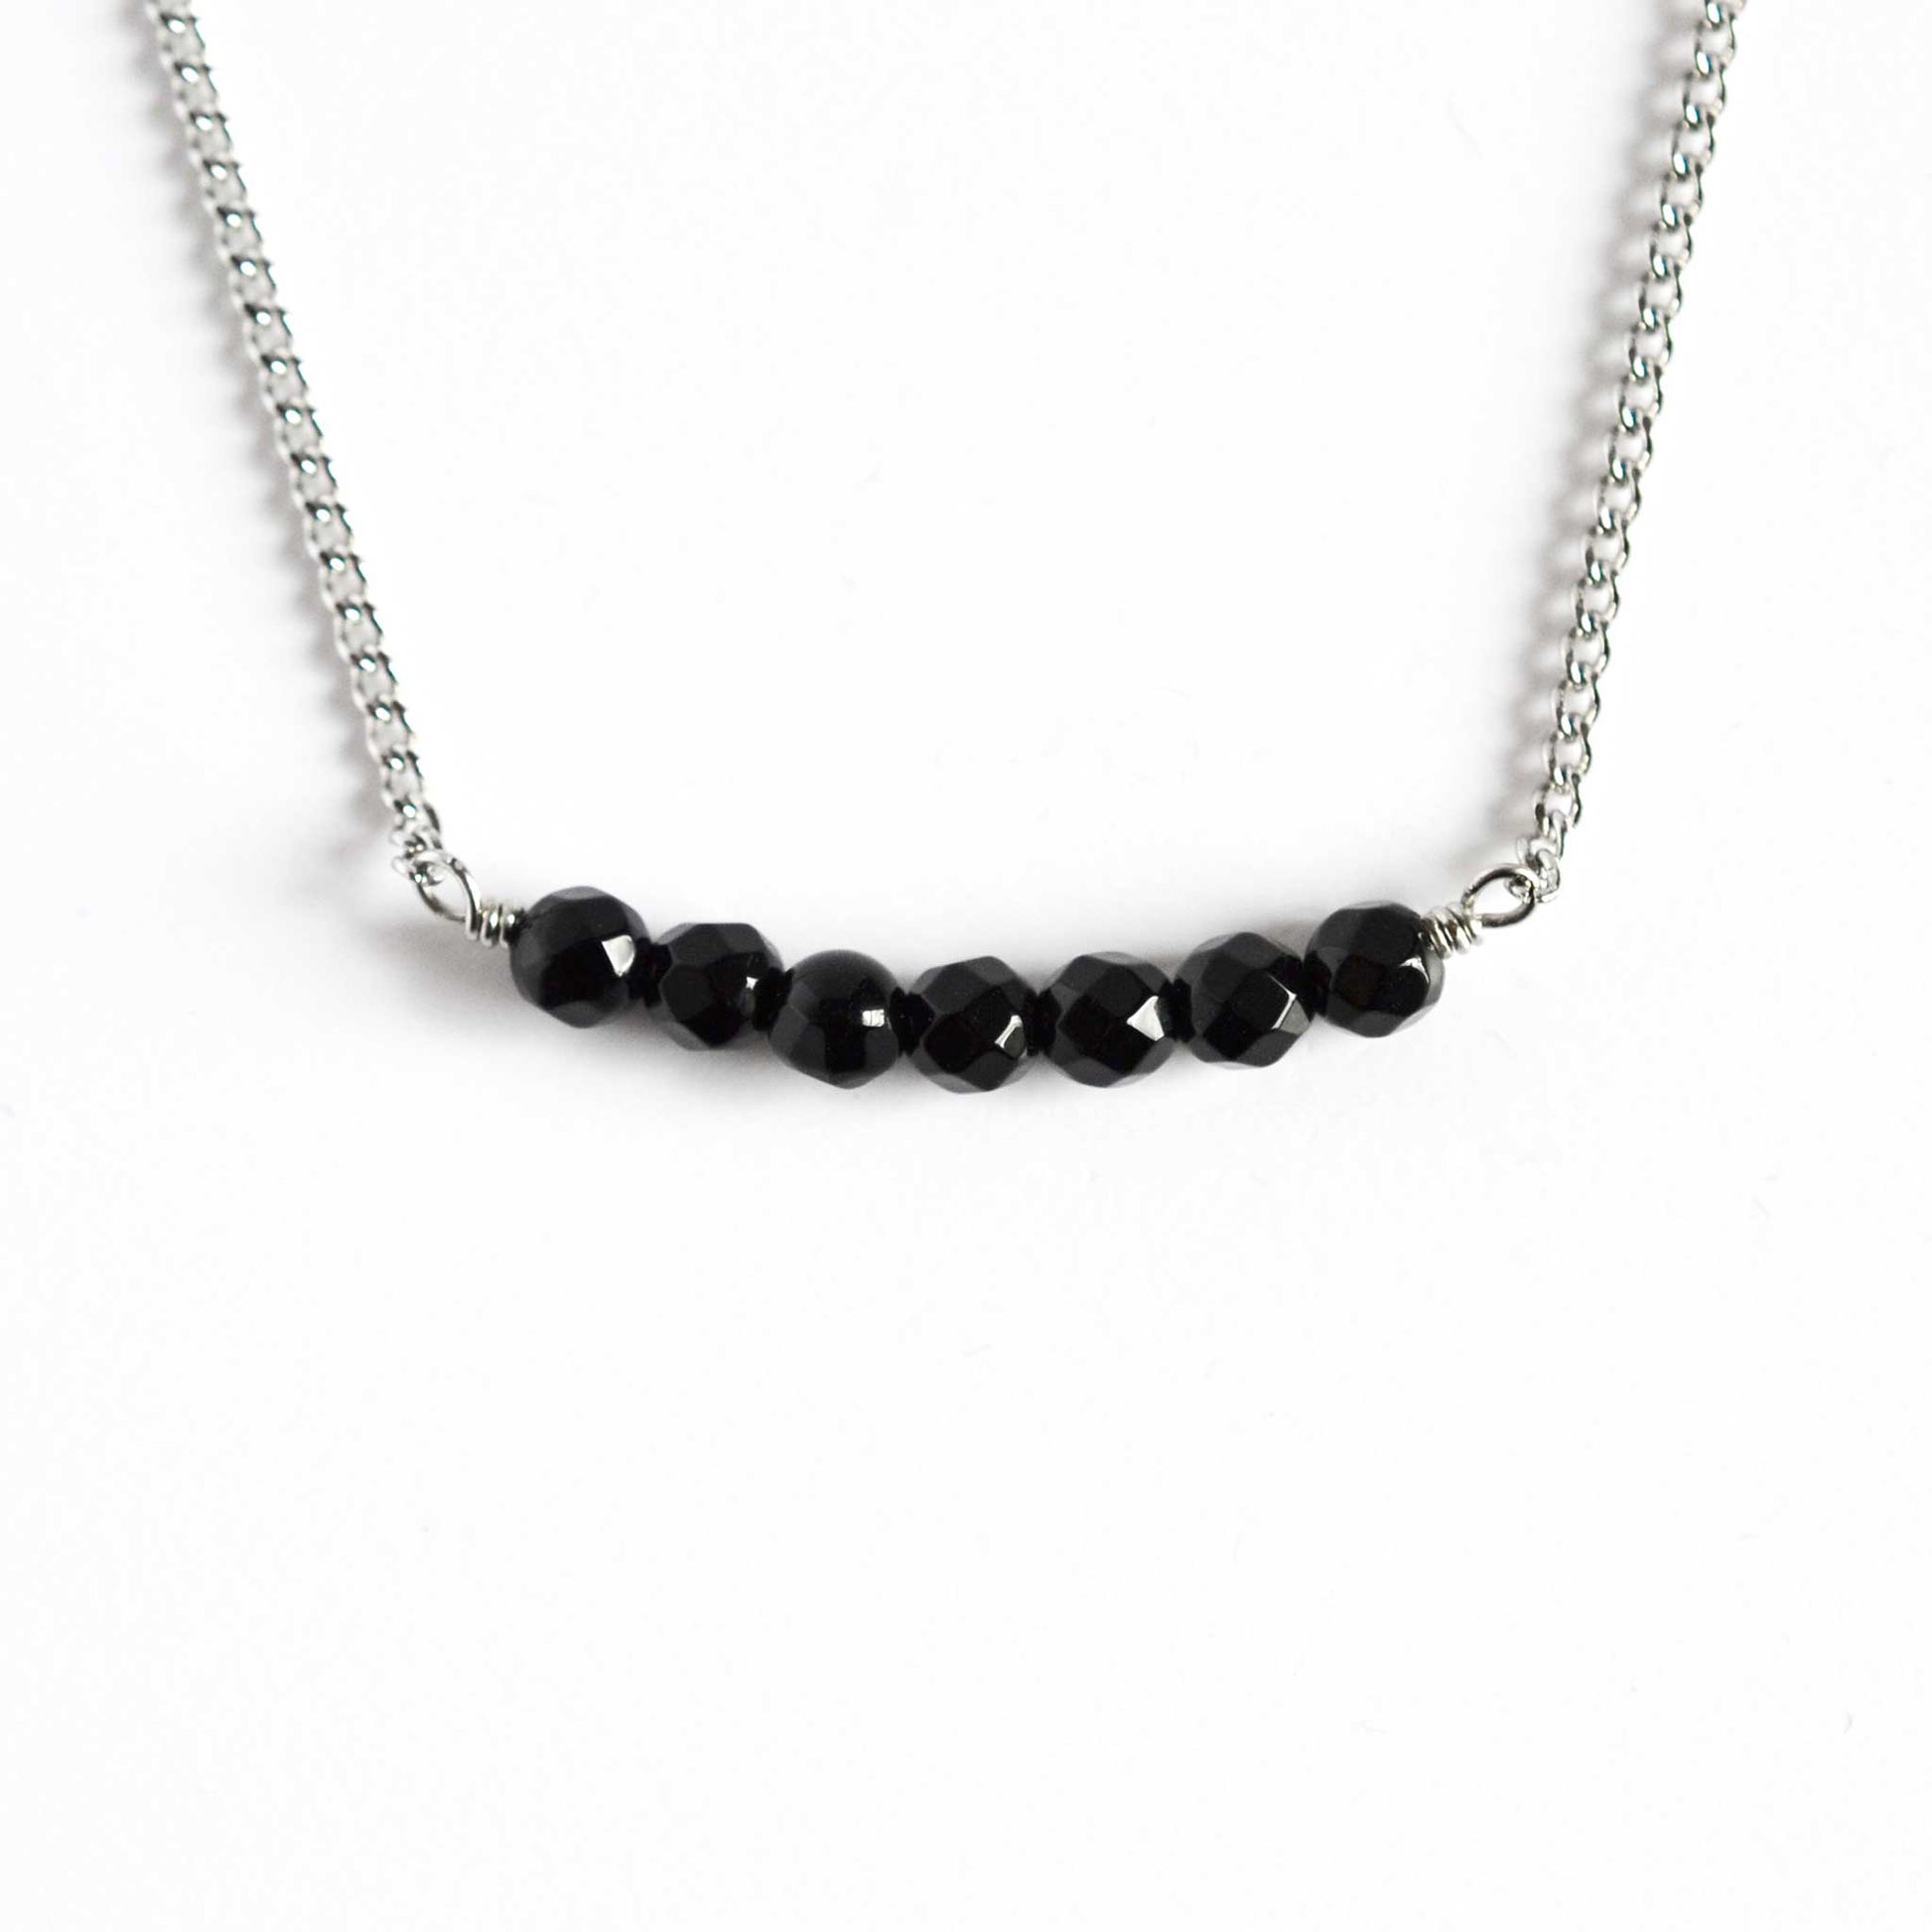 Onyx necklace black stone and stainless steel on white background